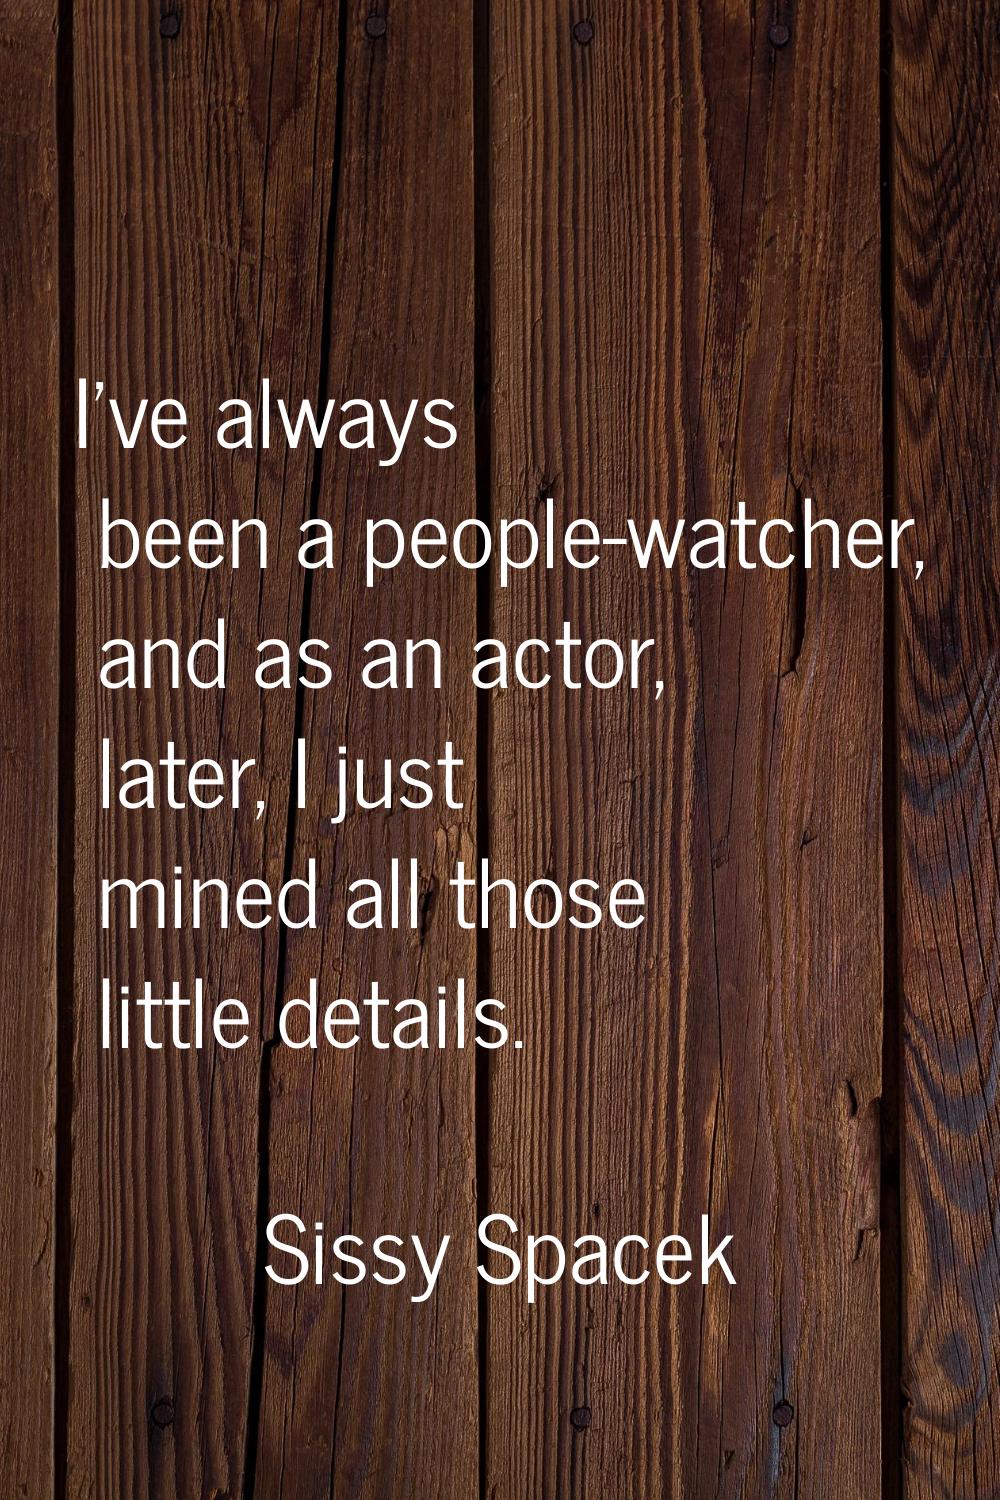 I've always been a people-watcher, and as an actor, later, I just mined all those little details.